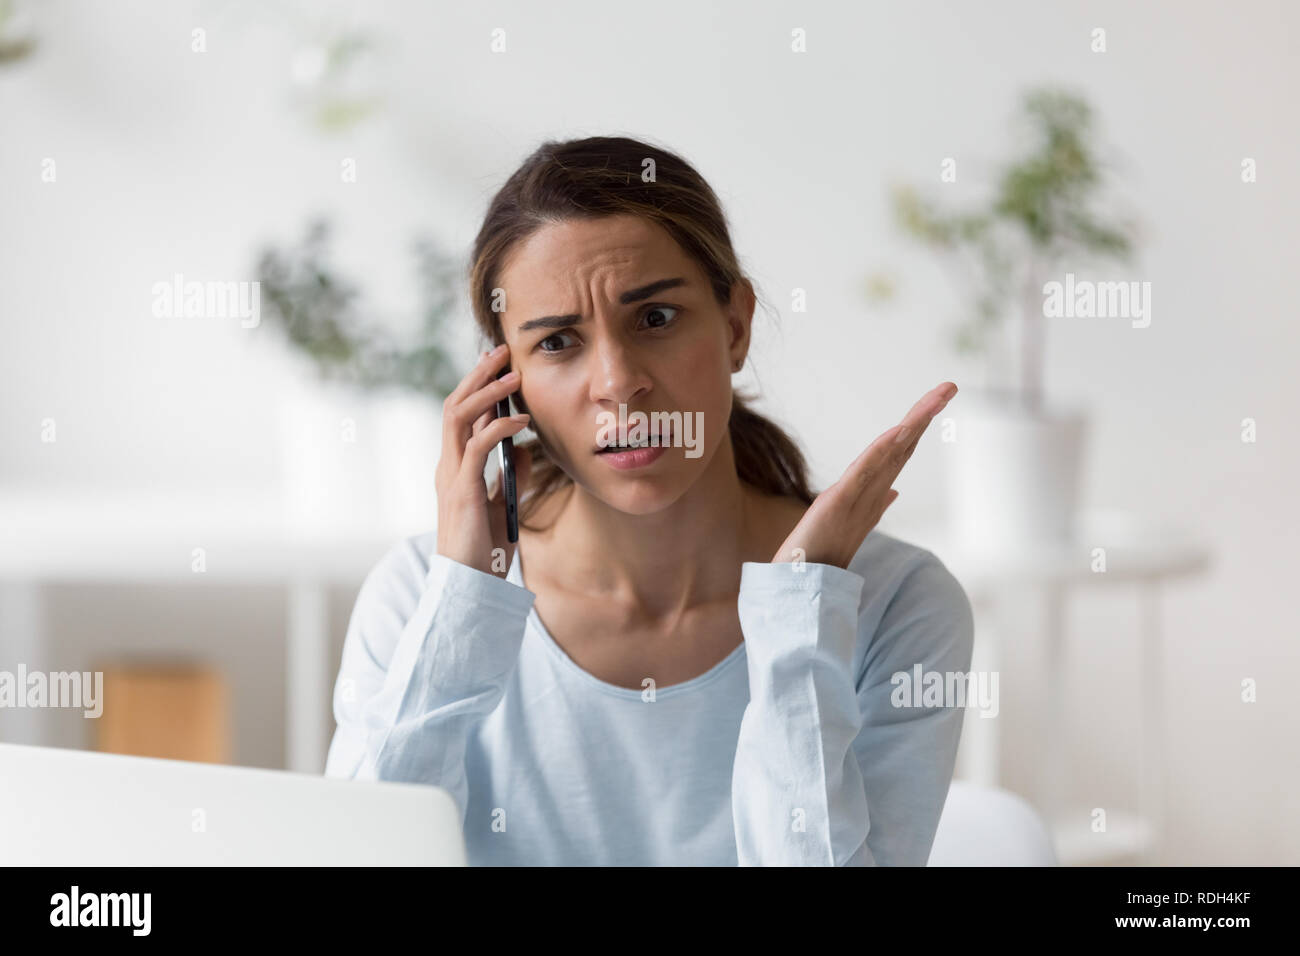 Upset unpleasantly surprised woman making phone call Stock Photo